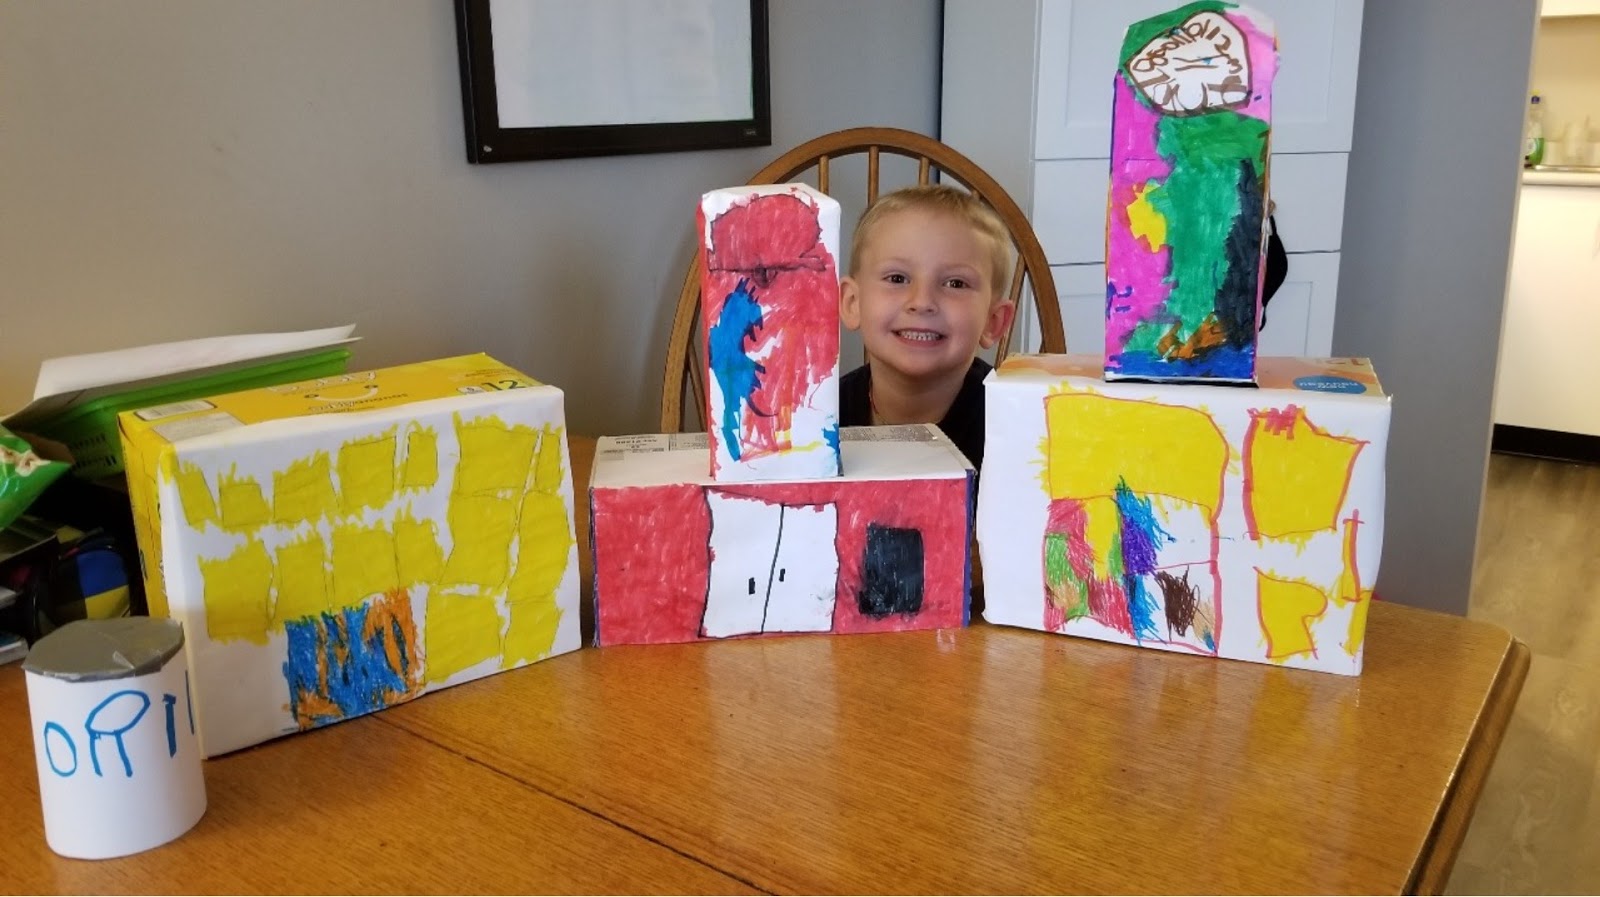 Child displays creation after going on virtual field trip